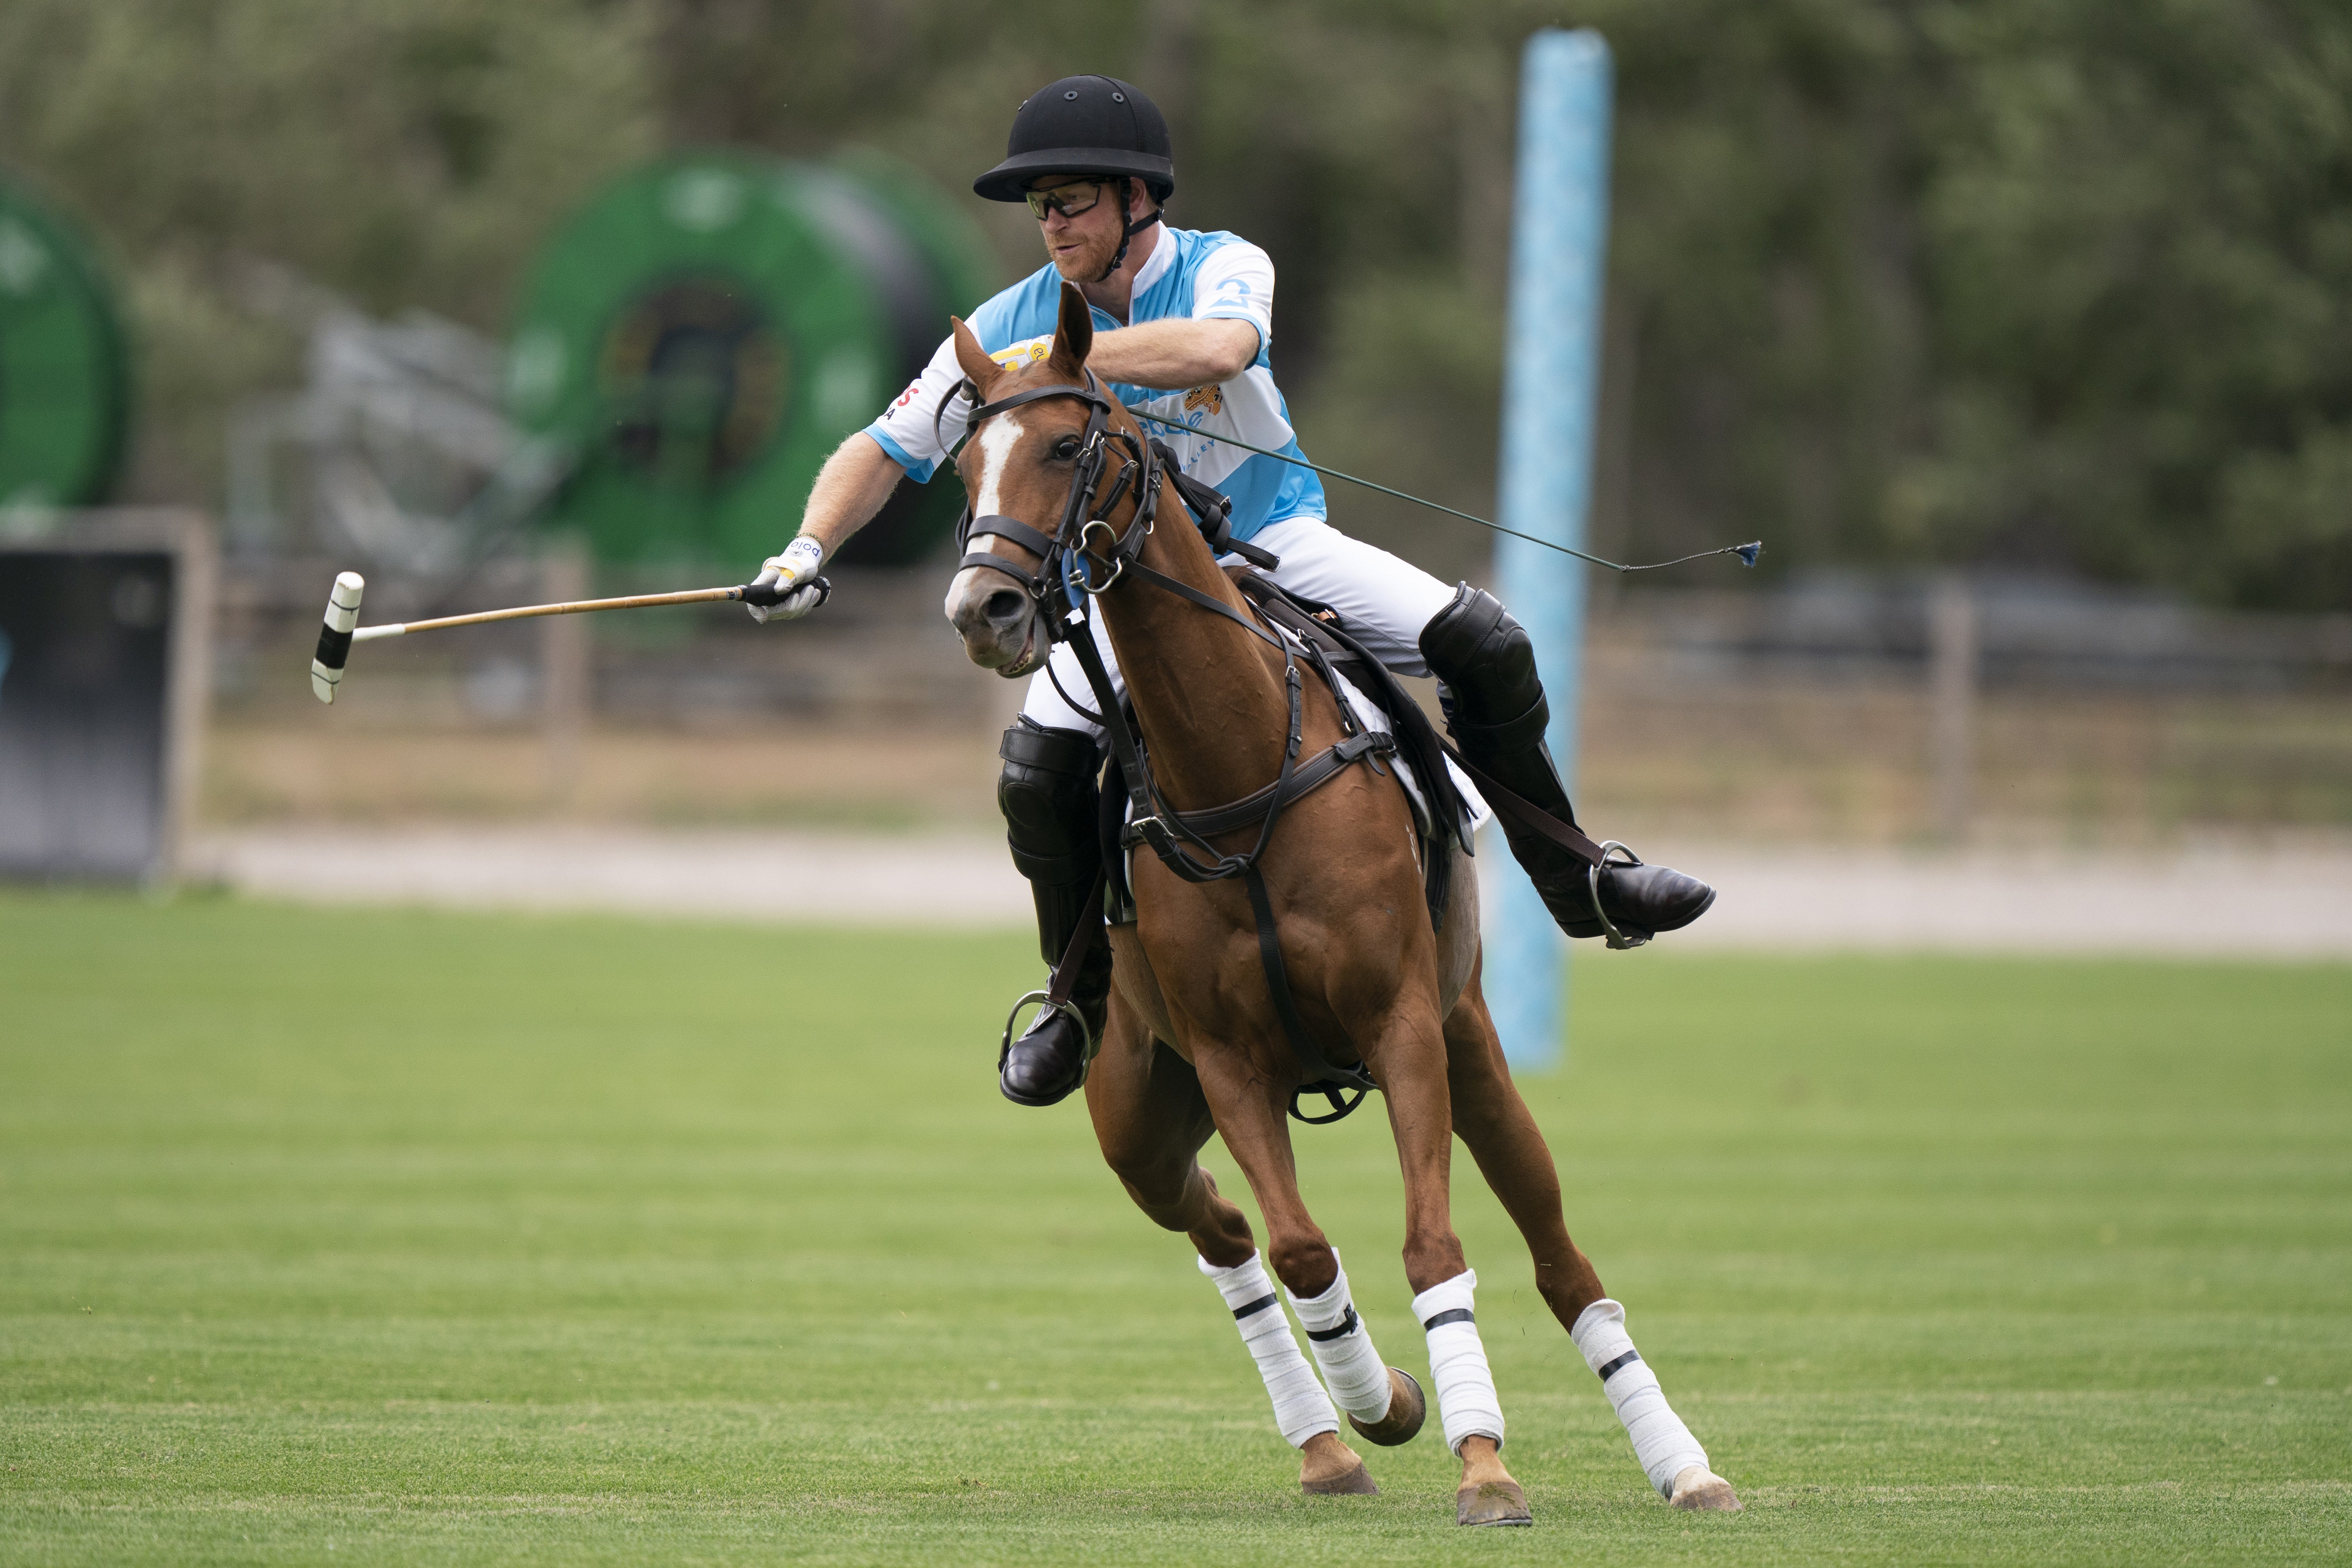 The Duke of Sussex plays in a polo match during the Sentebale ISPS Handa Polo Cup at the Aspen Valley Polo Club in Carbondale, Colorado (Kirsty O’Connor/PA)